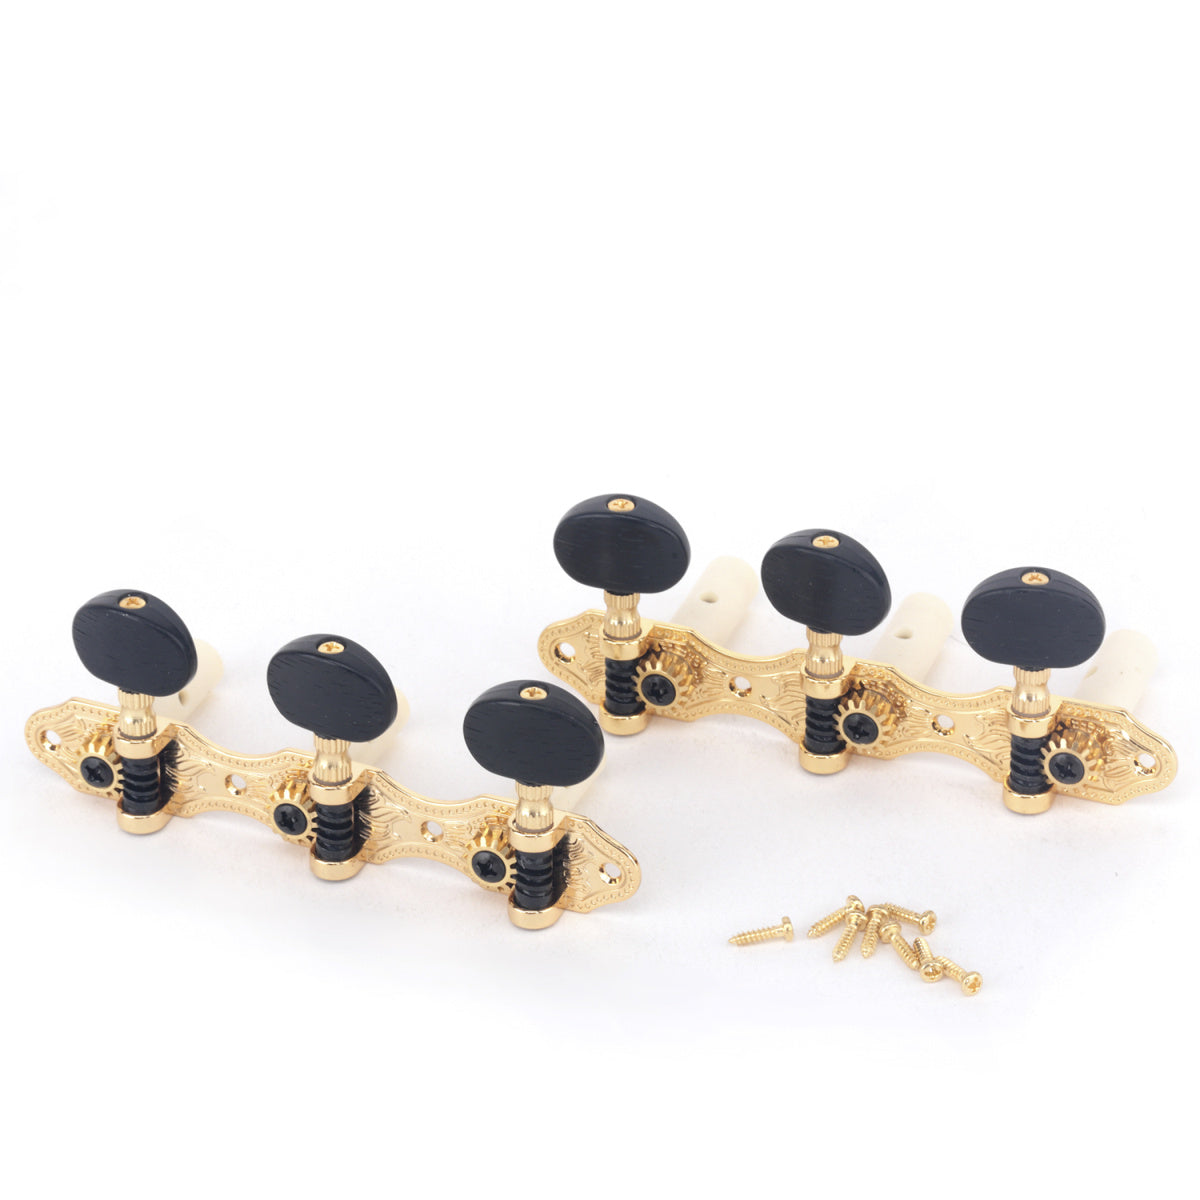 Musiclily Pro 3X3 Baker Style Classical Guitar Tuners Tuning Keys Machine Heads Set, Gold